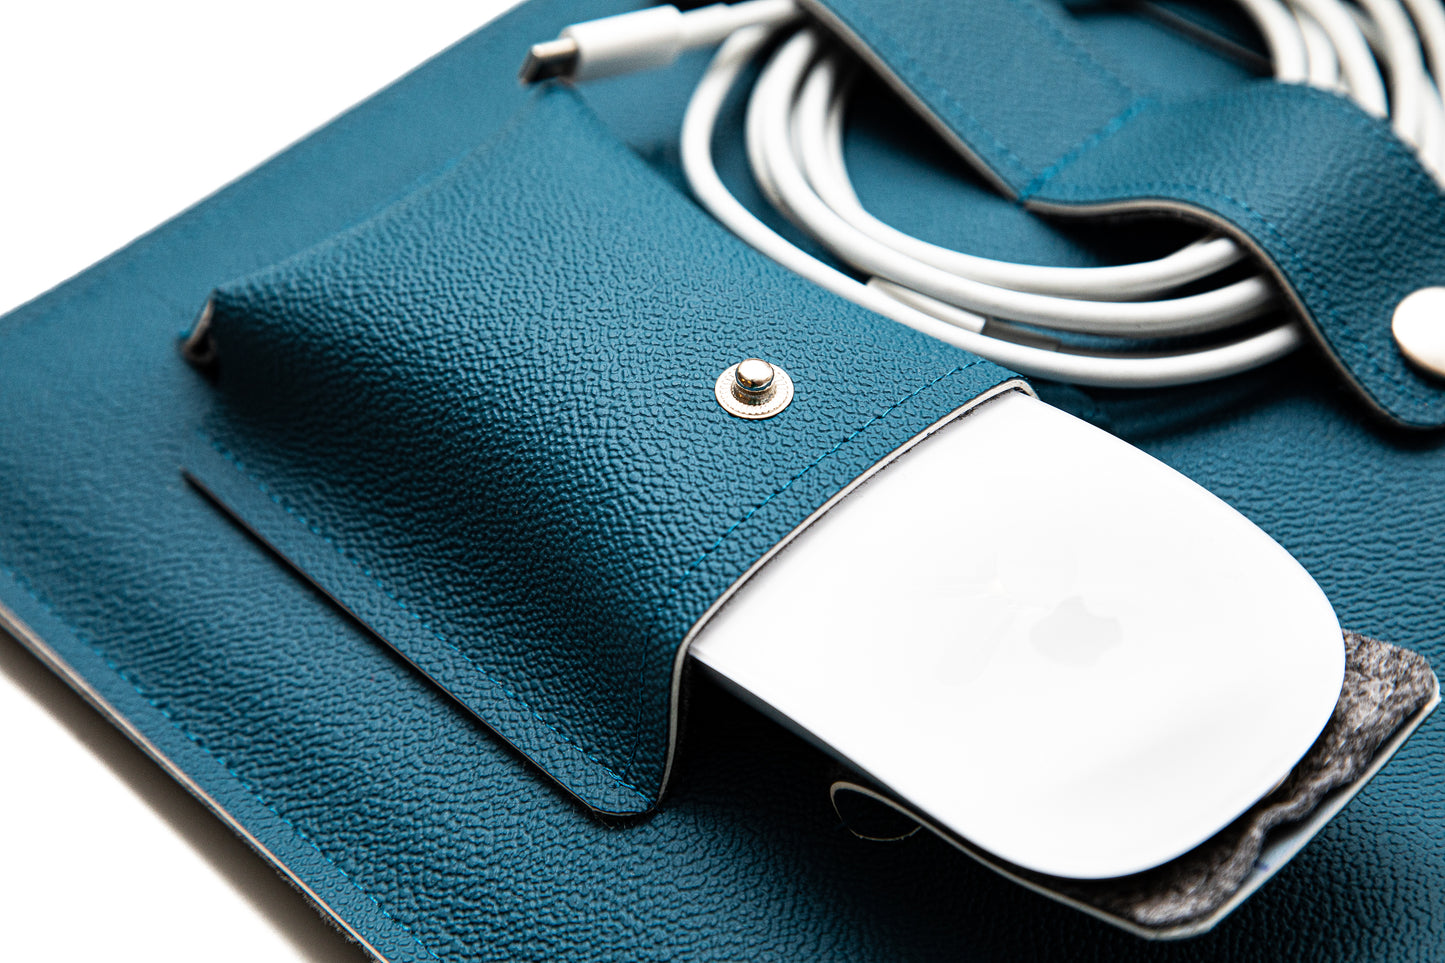 MacBook Organizer Bag with Magic Mouse & Charger Pockets